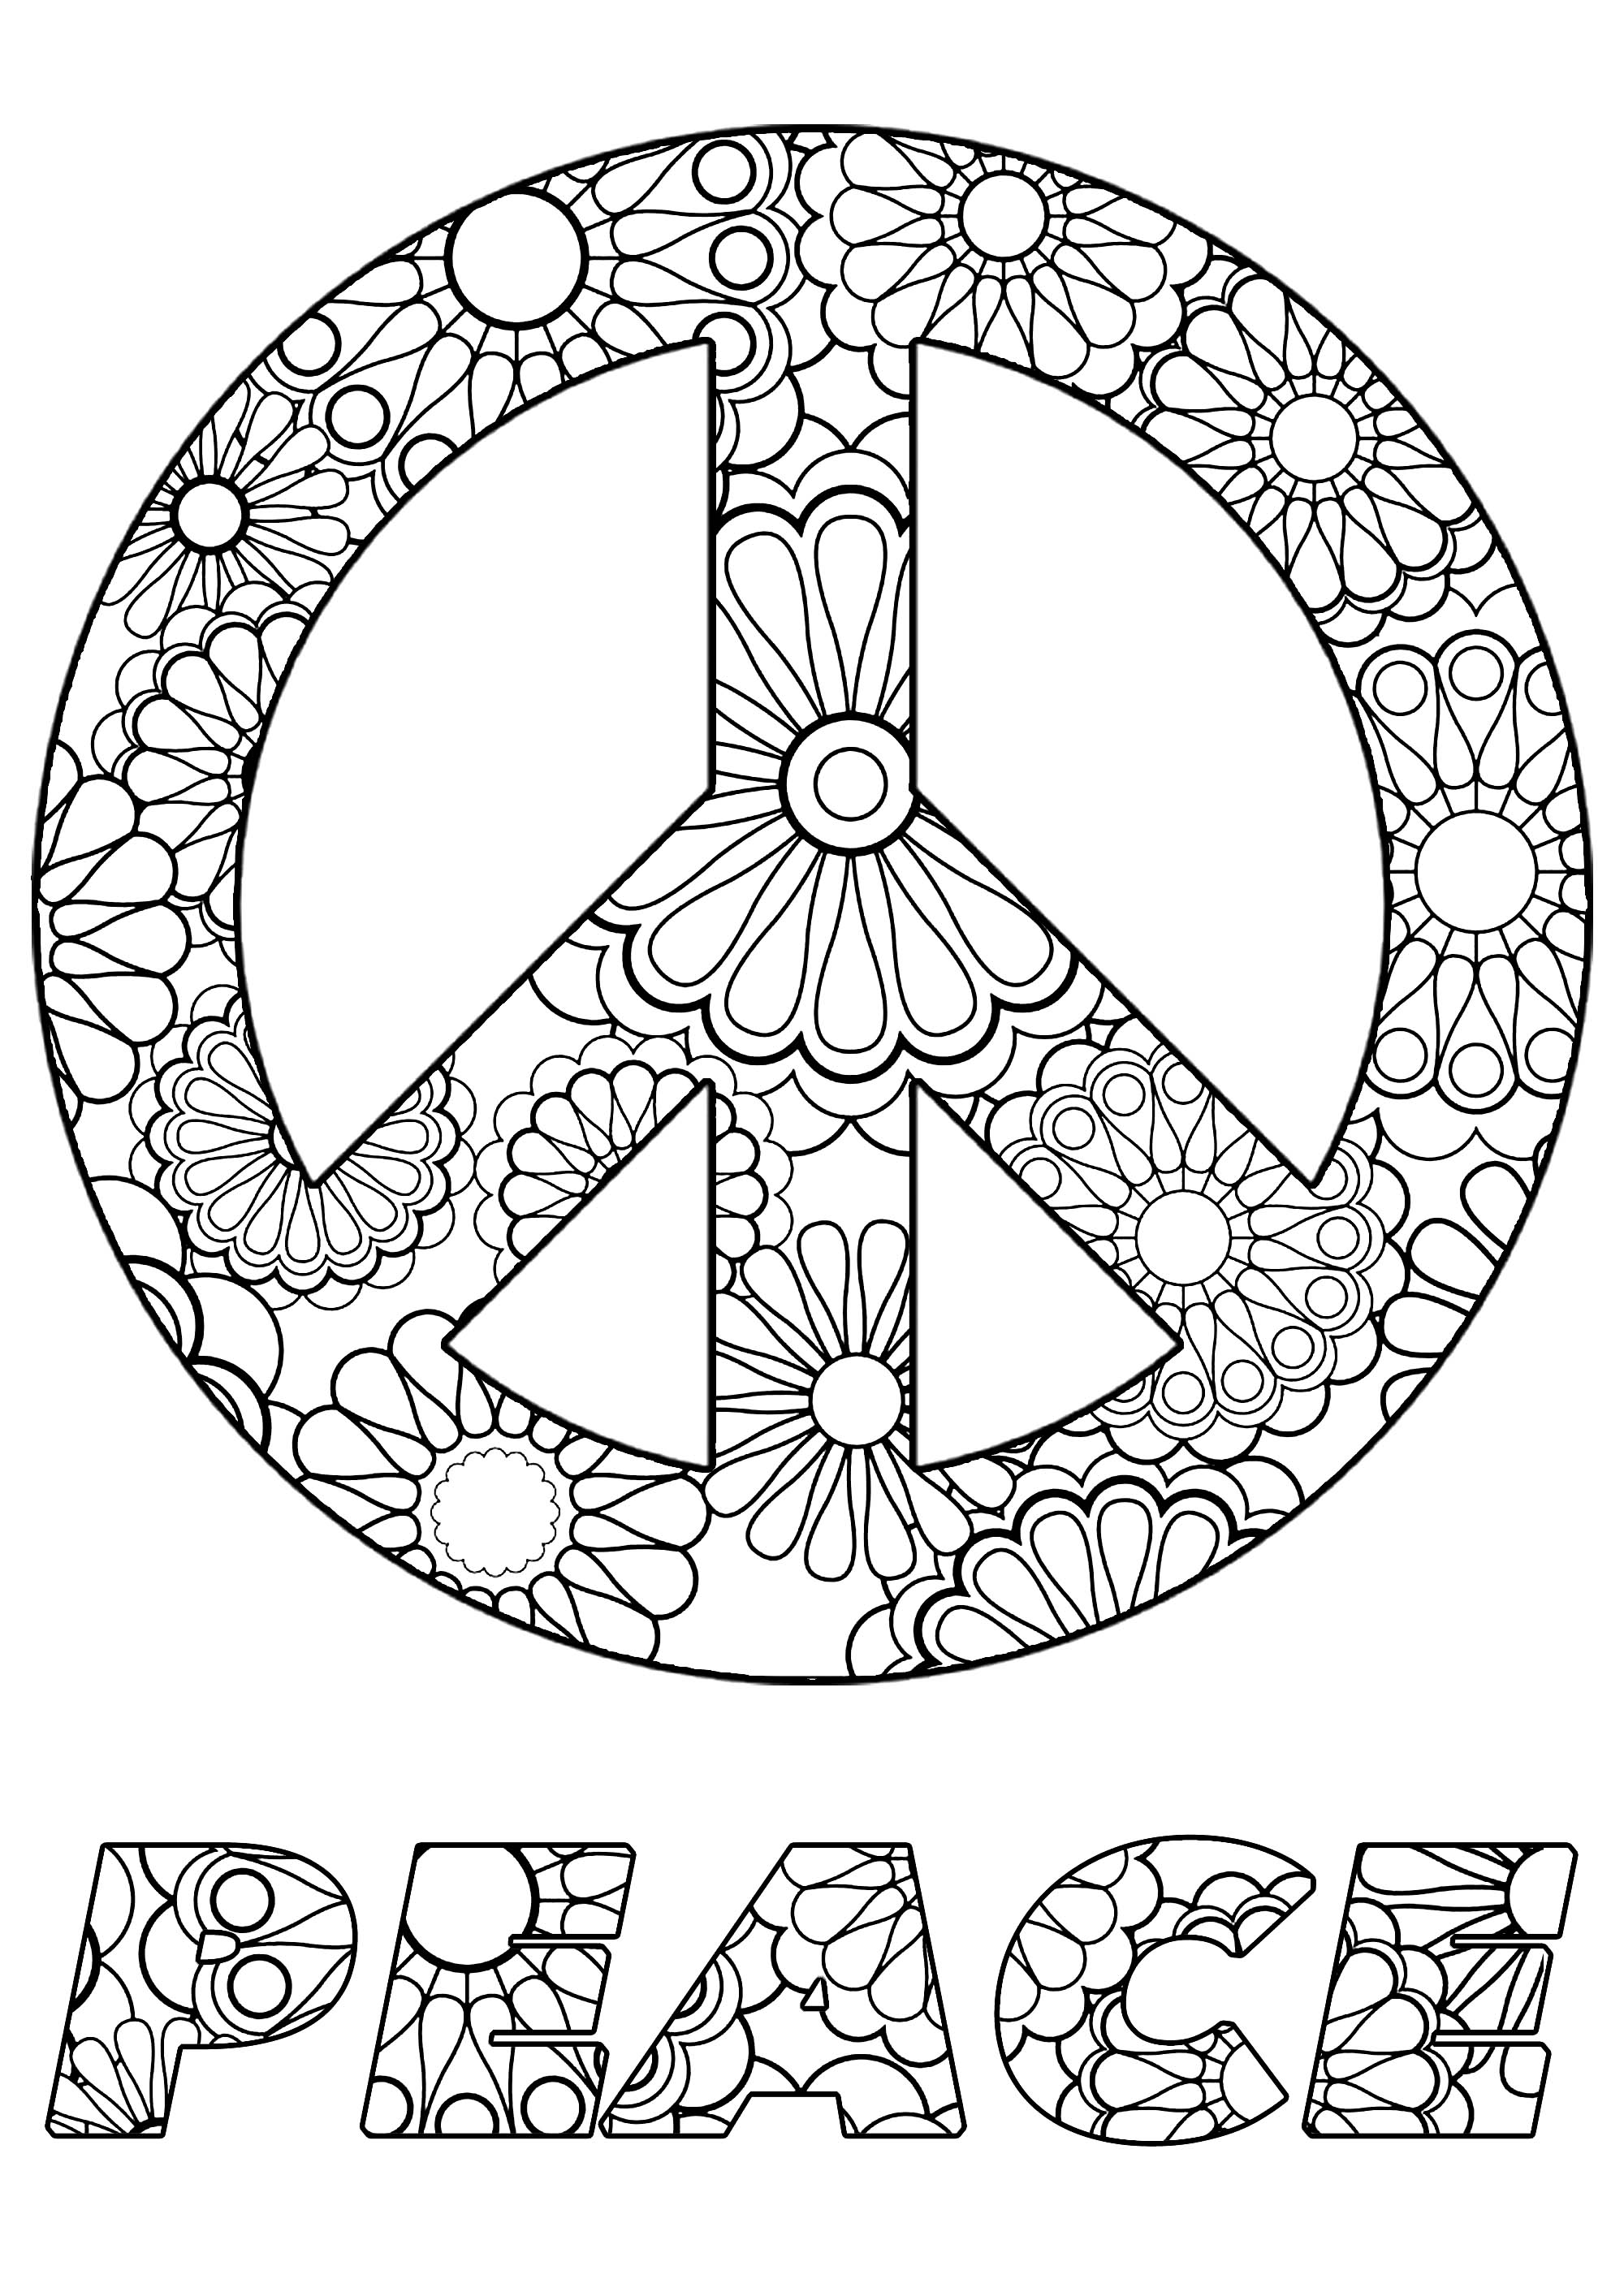 Color the Peace symbol and text, with beautiful flowers inside